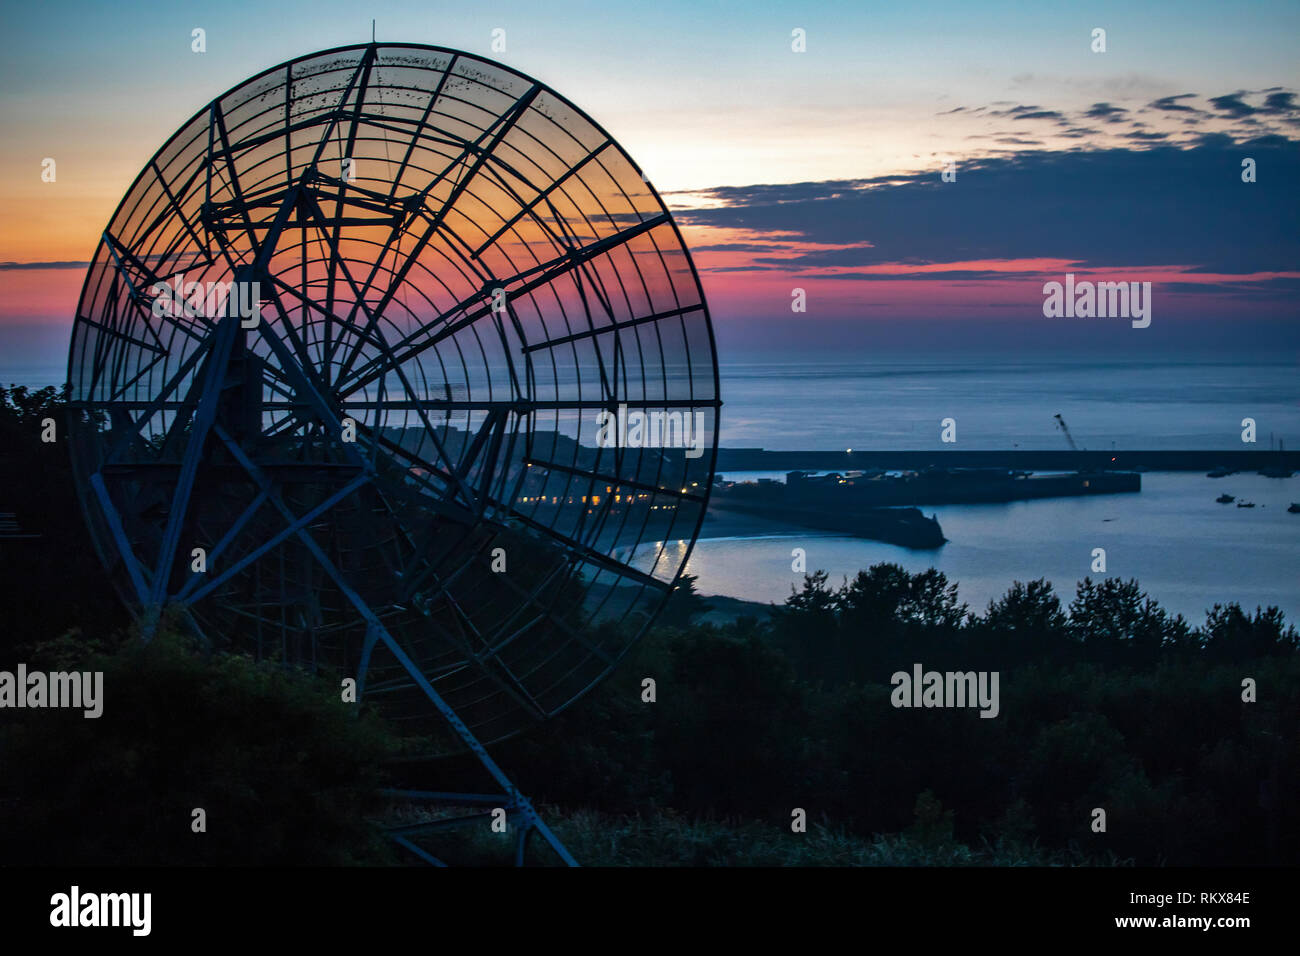 A communications dish at Valongis, on Alderney, Channel Islands. Stock Photo